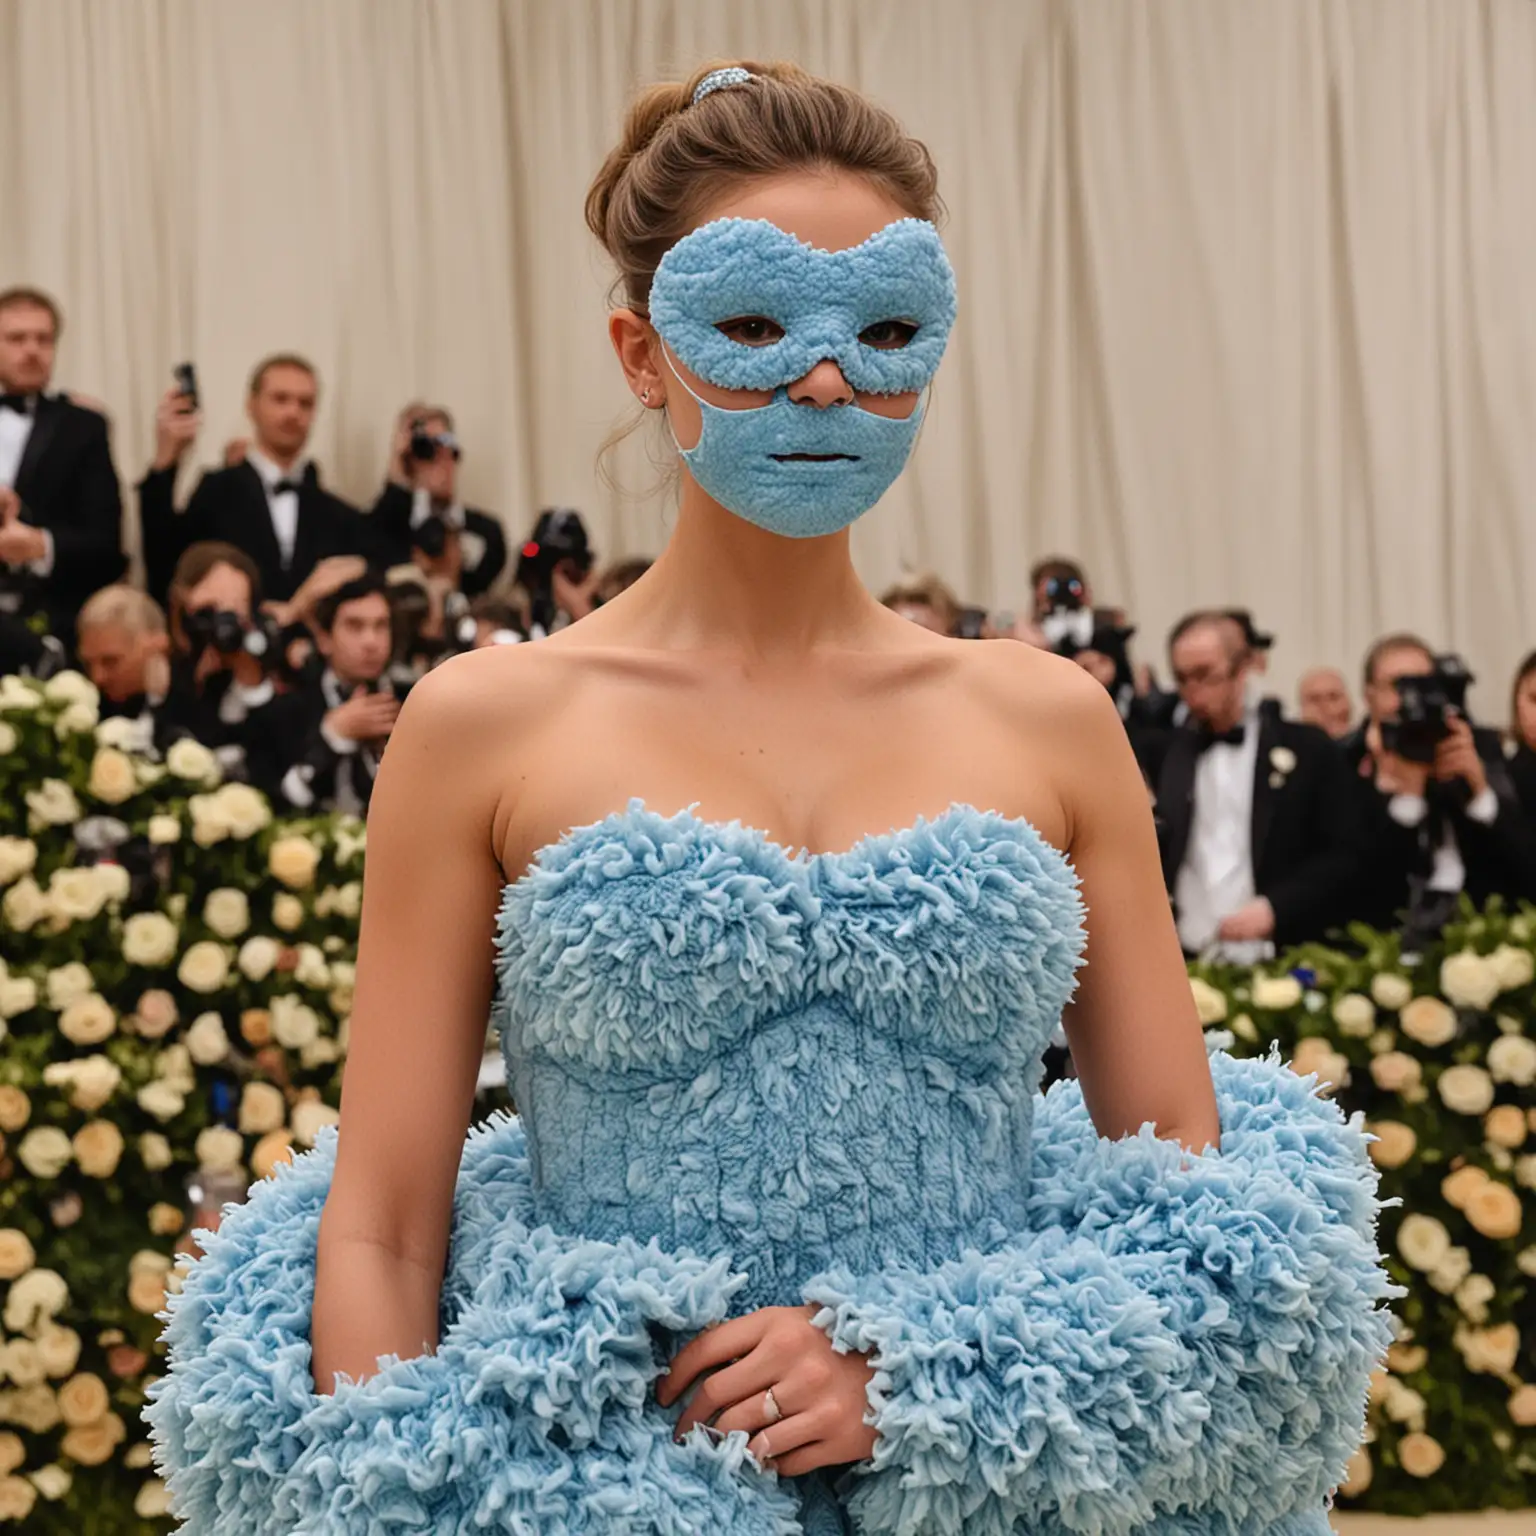 Met Gala Fashion Model in Blue Fluffy Pillow Dress and Sleeping Mask